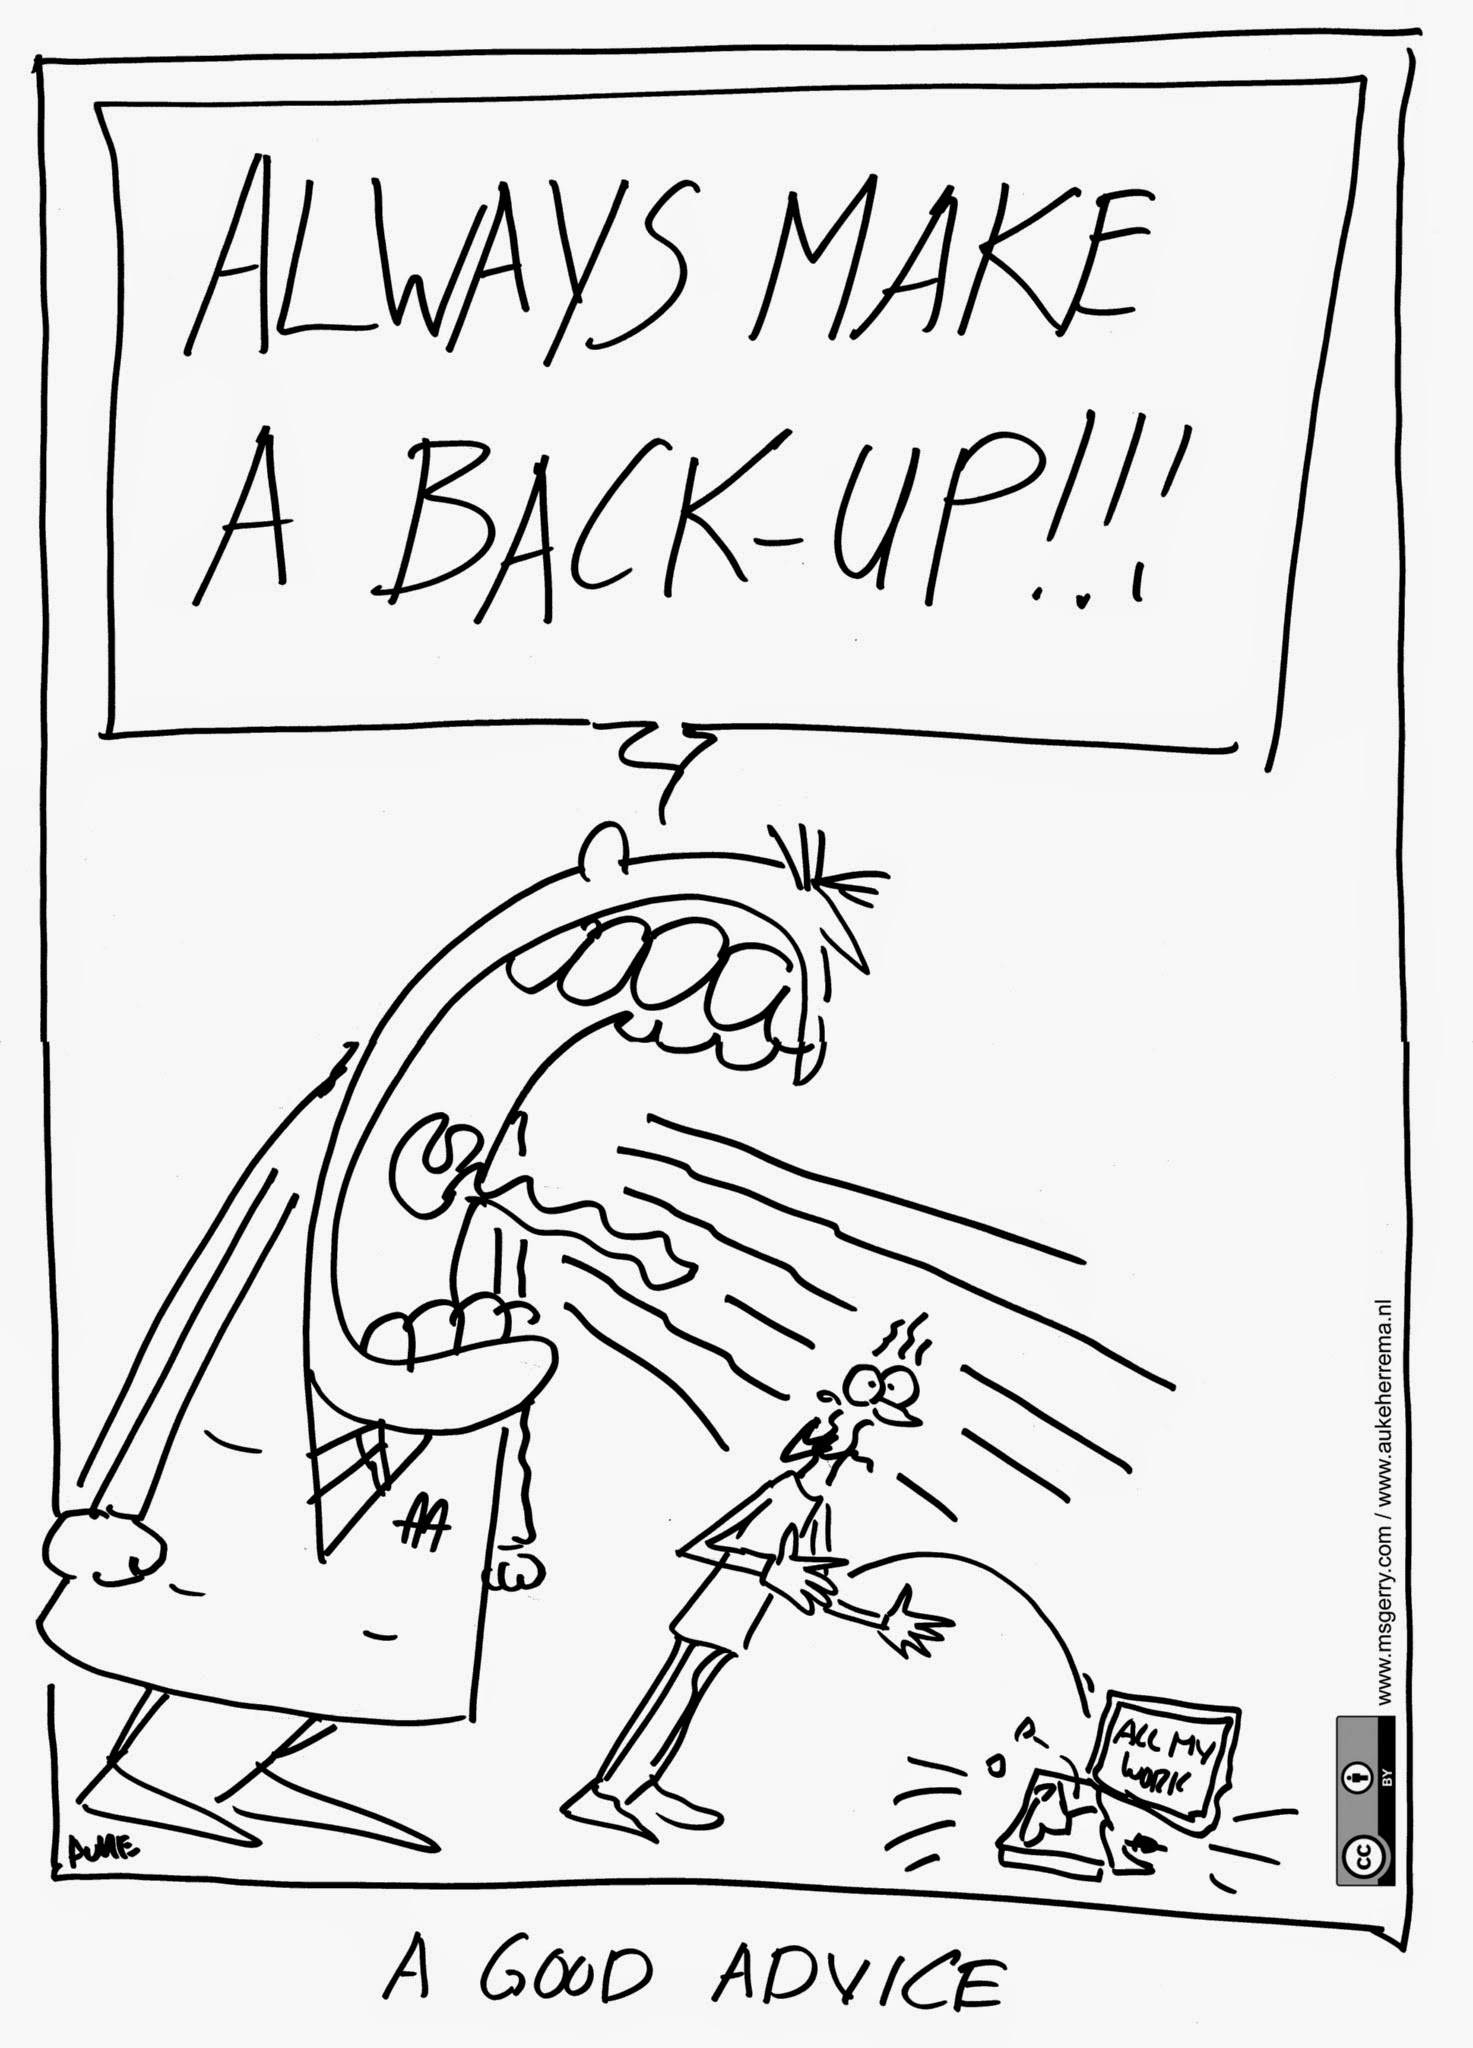 Illustration of backup need with the legend "a good advice". One big character is crying "always make a backup" loud. A second character is startled and let their computer labelled "all my work" fall on the floor and crash.